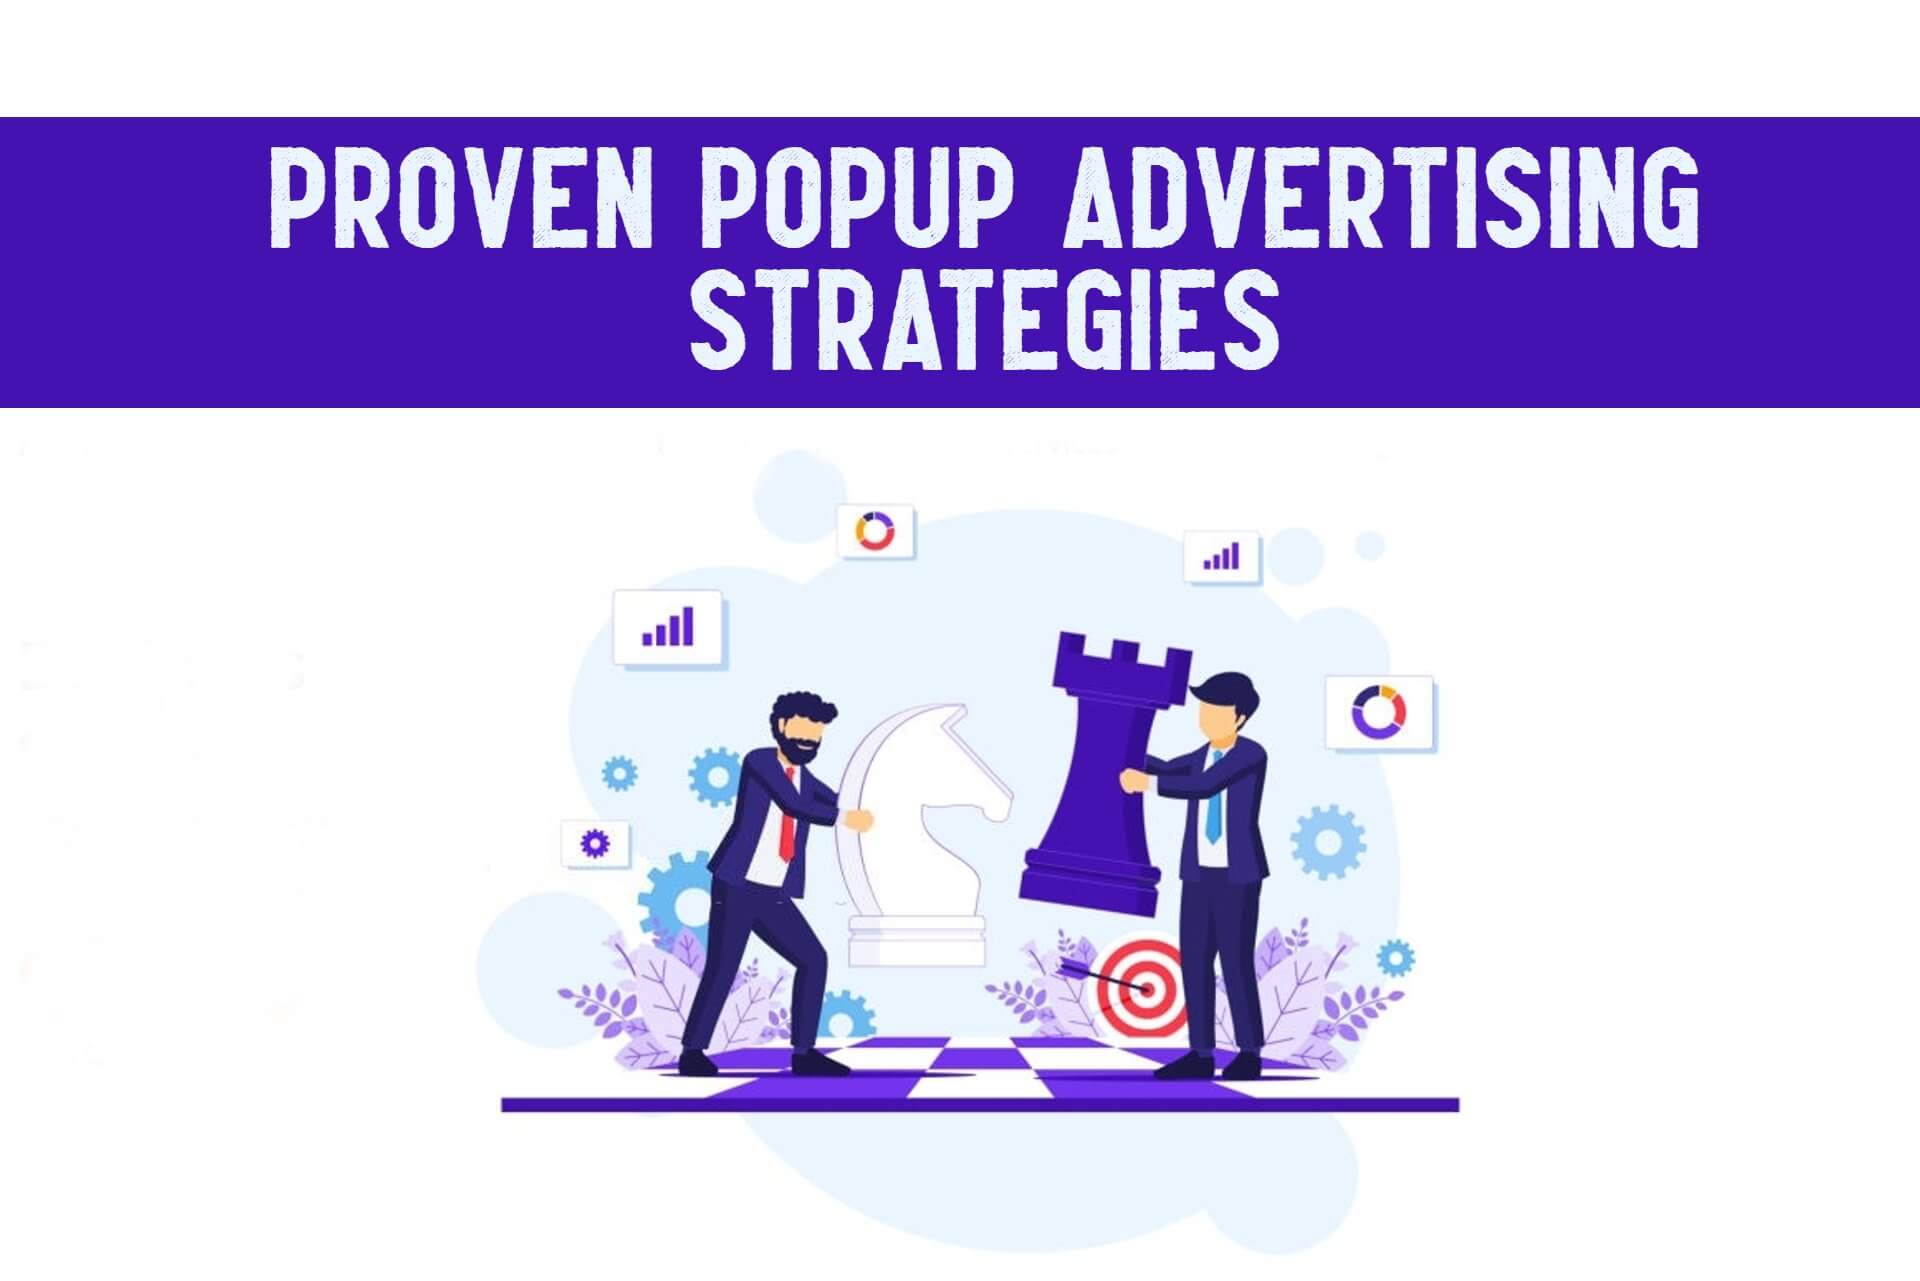 Top 10 Proven Popup Advertising Strategies for Small Businesses